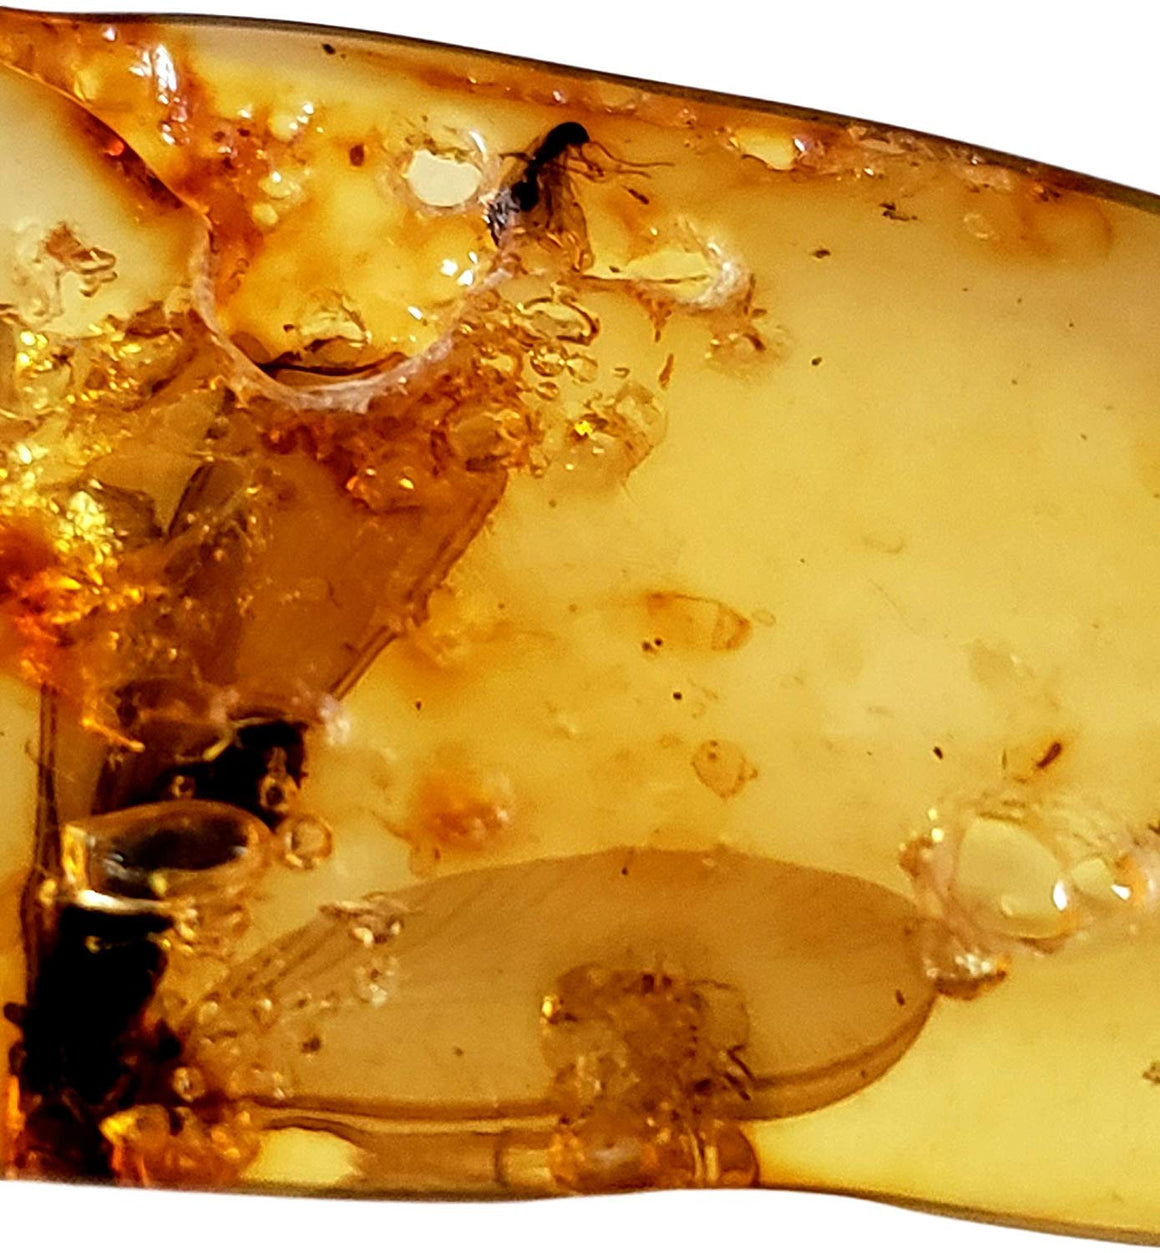 Genuine Amber Fossil Specimen - Multiple Insect Inclusions - Naturally Formed from Colombia with Bugs Inside - Museum Grade, A-Grade - Great Collectible - Piece #7 (78mm x 18mm) - dinosaursrocksuperstore